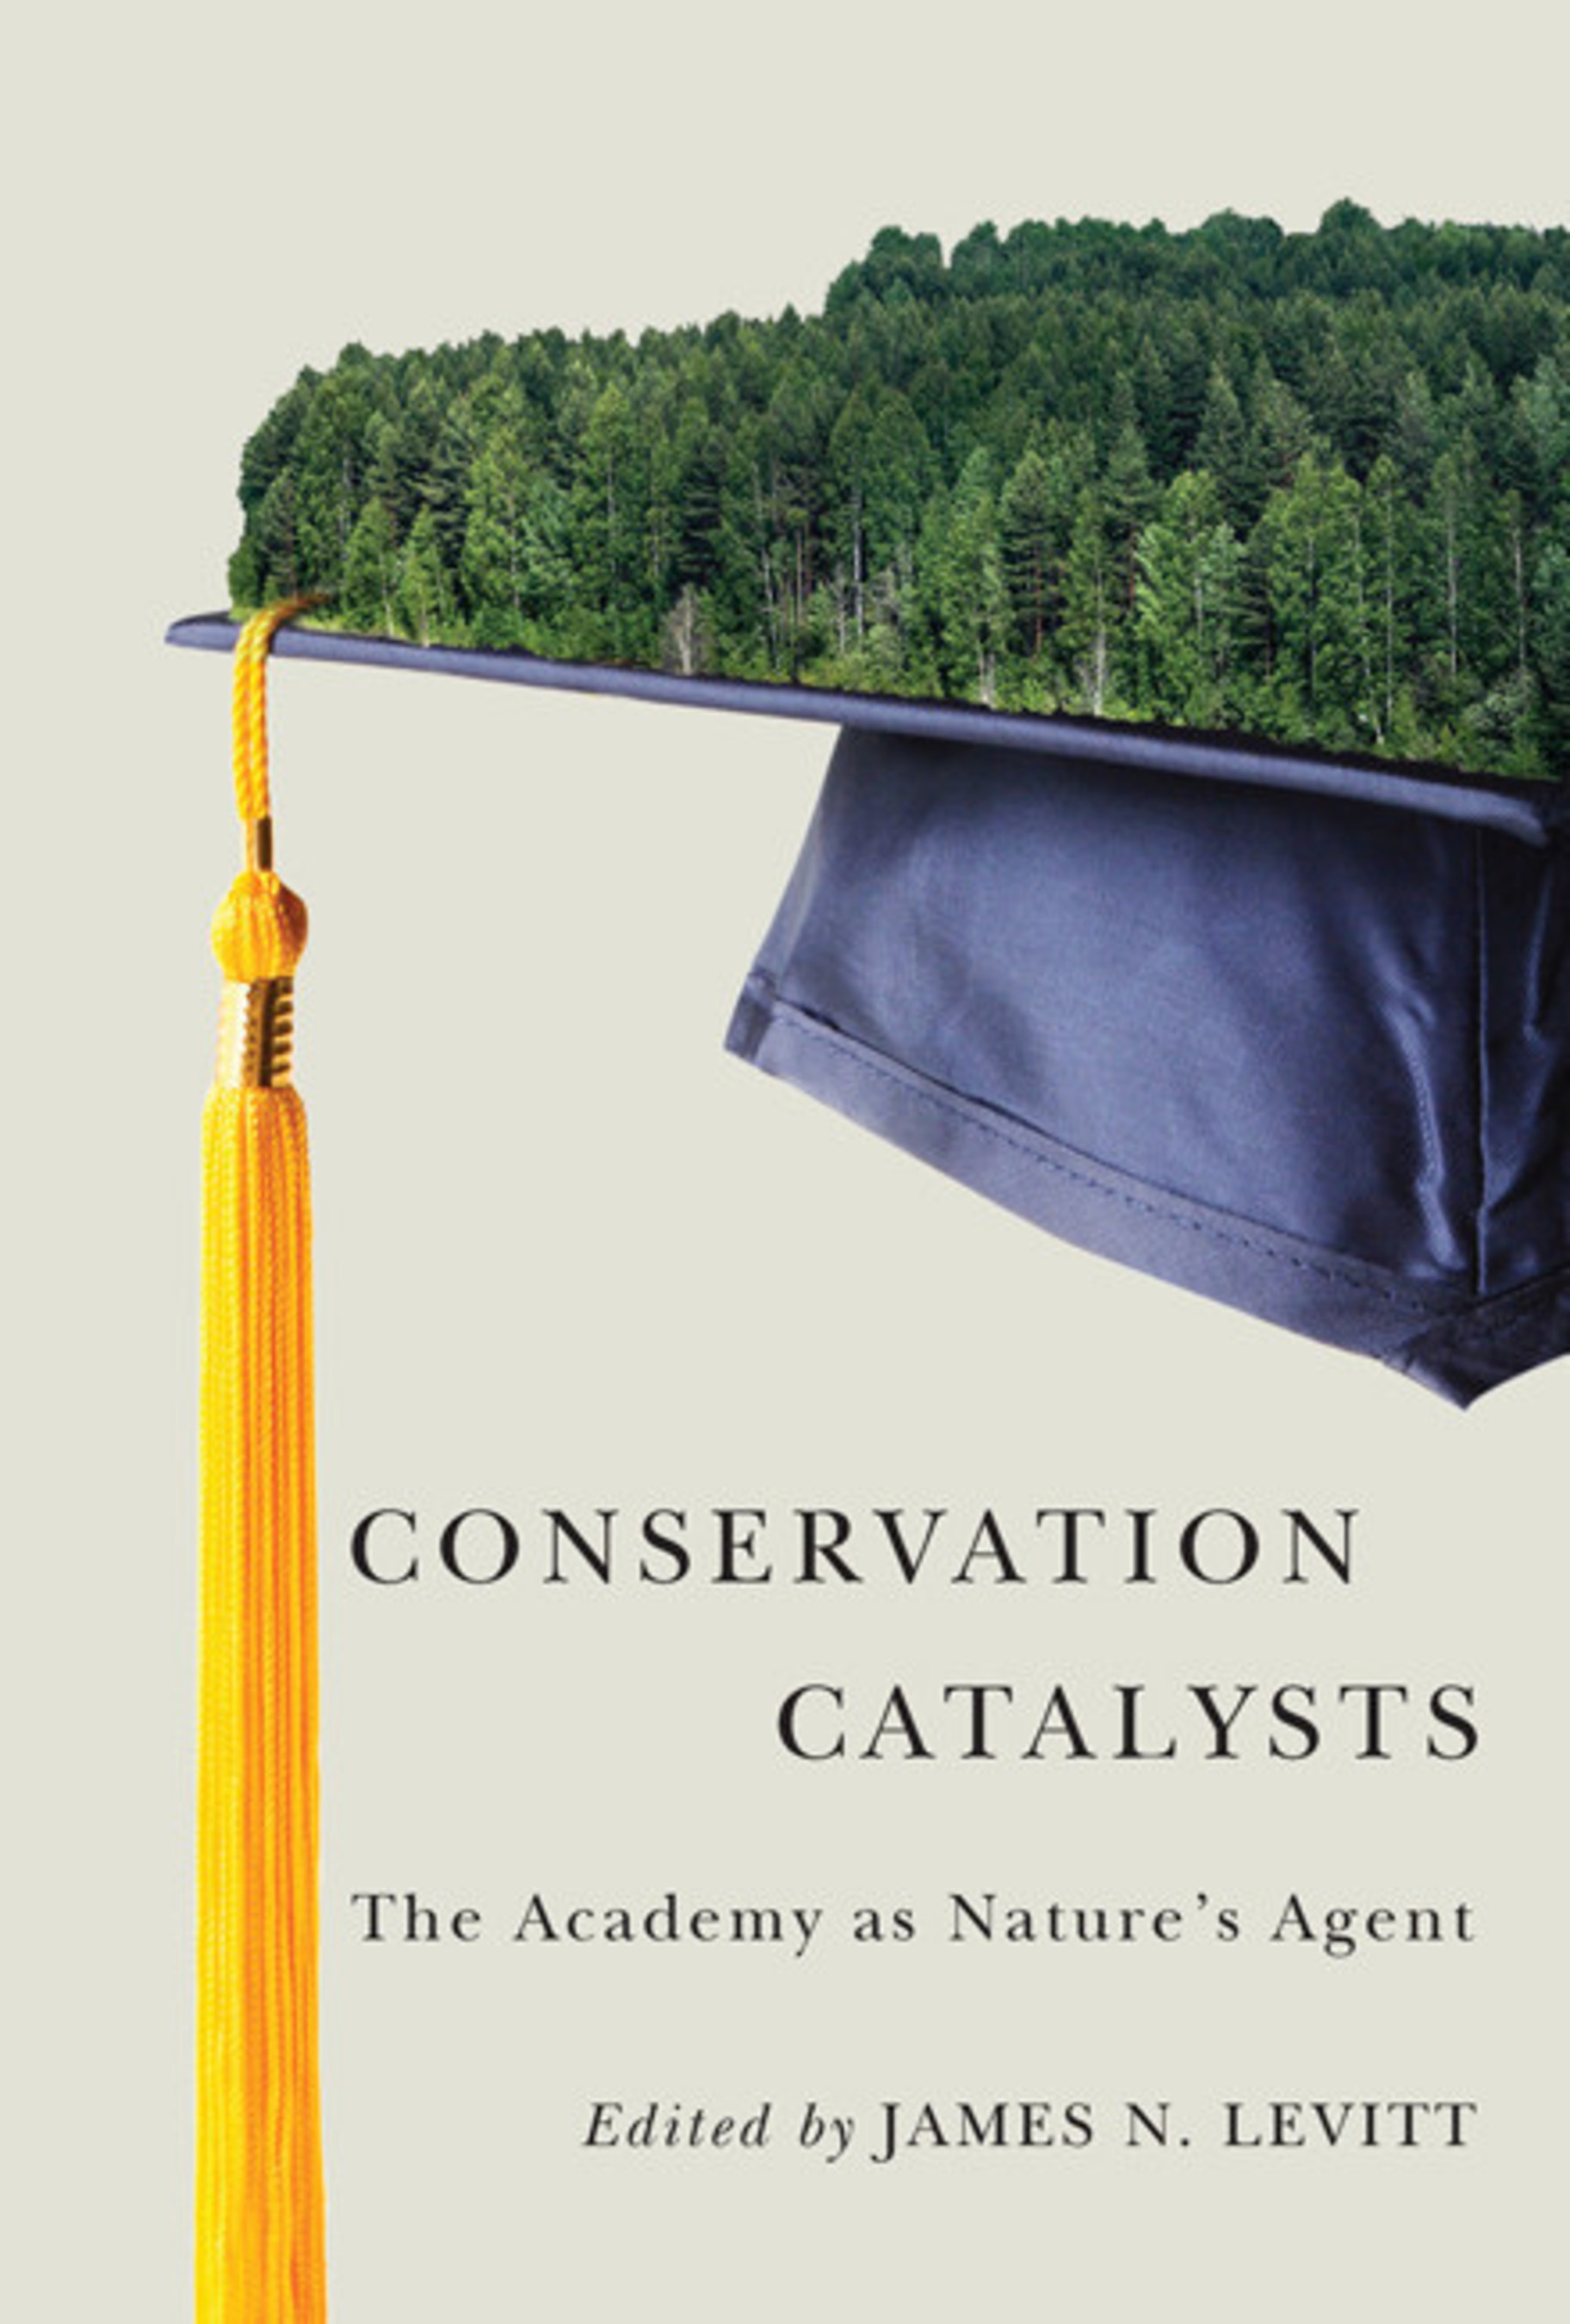 The Lincoln Institute of Land Policy announced the publication of Conservation Catalysts: The Academy as Nature's Agent, being launched at the IUCN World Parks Congress in Sydney